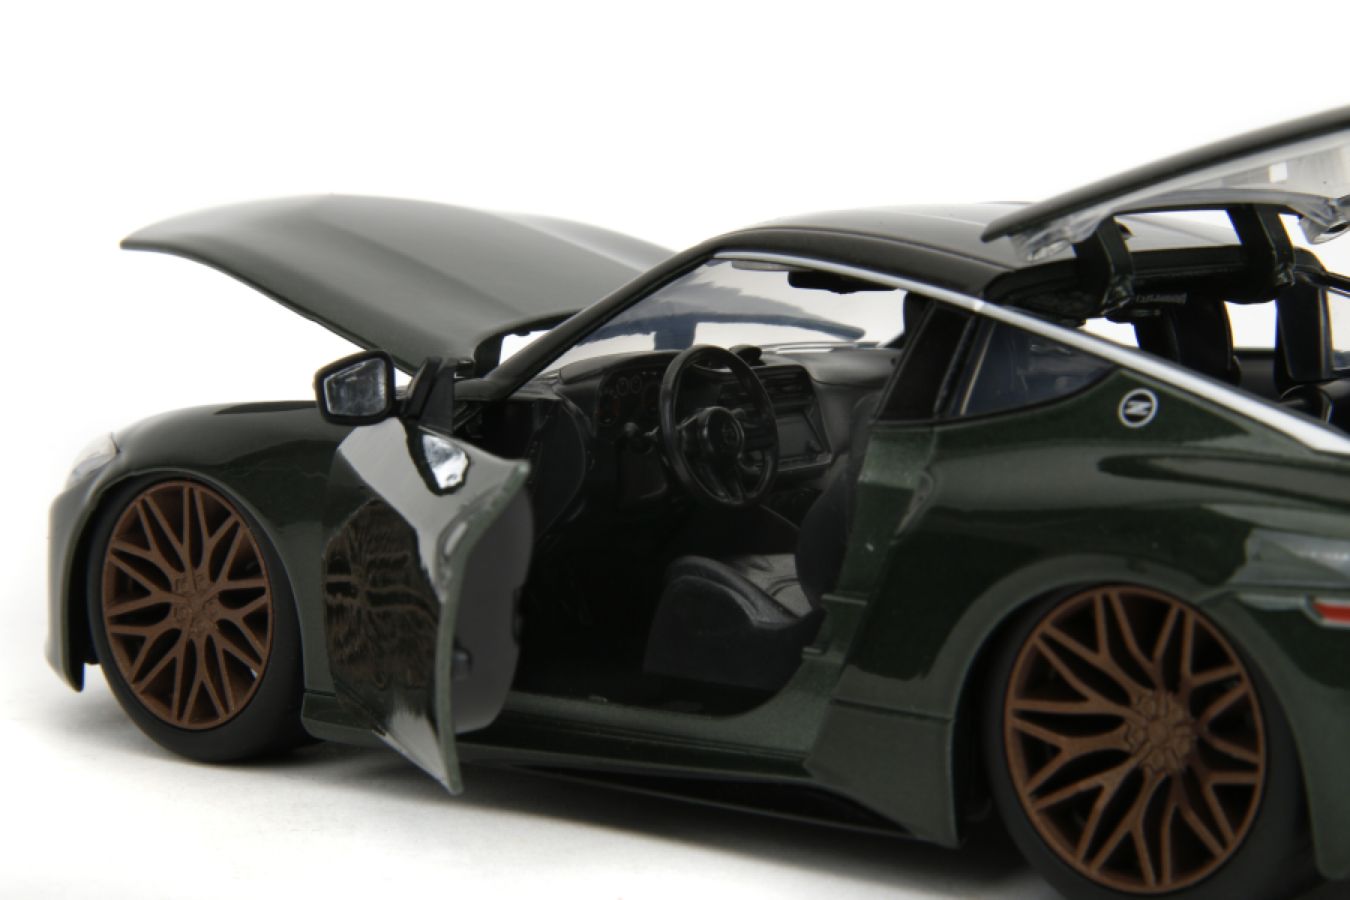 Fast & Furious - 2023 Nissan Fairlady Z 1:24 Scale Die-cast Vehicle